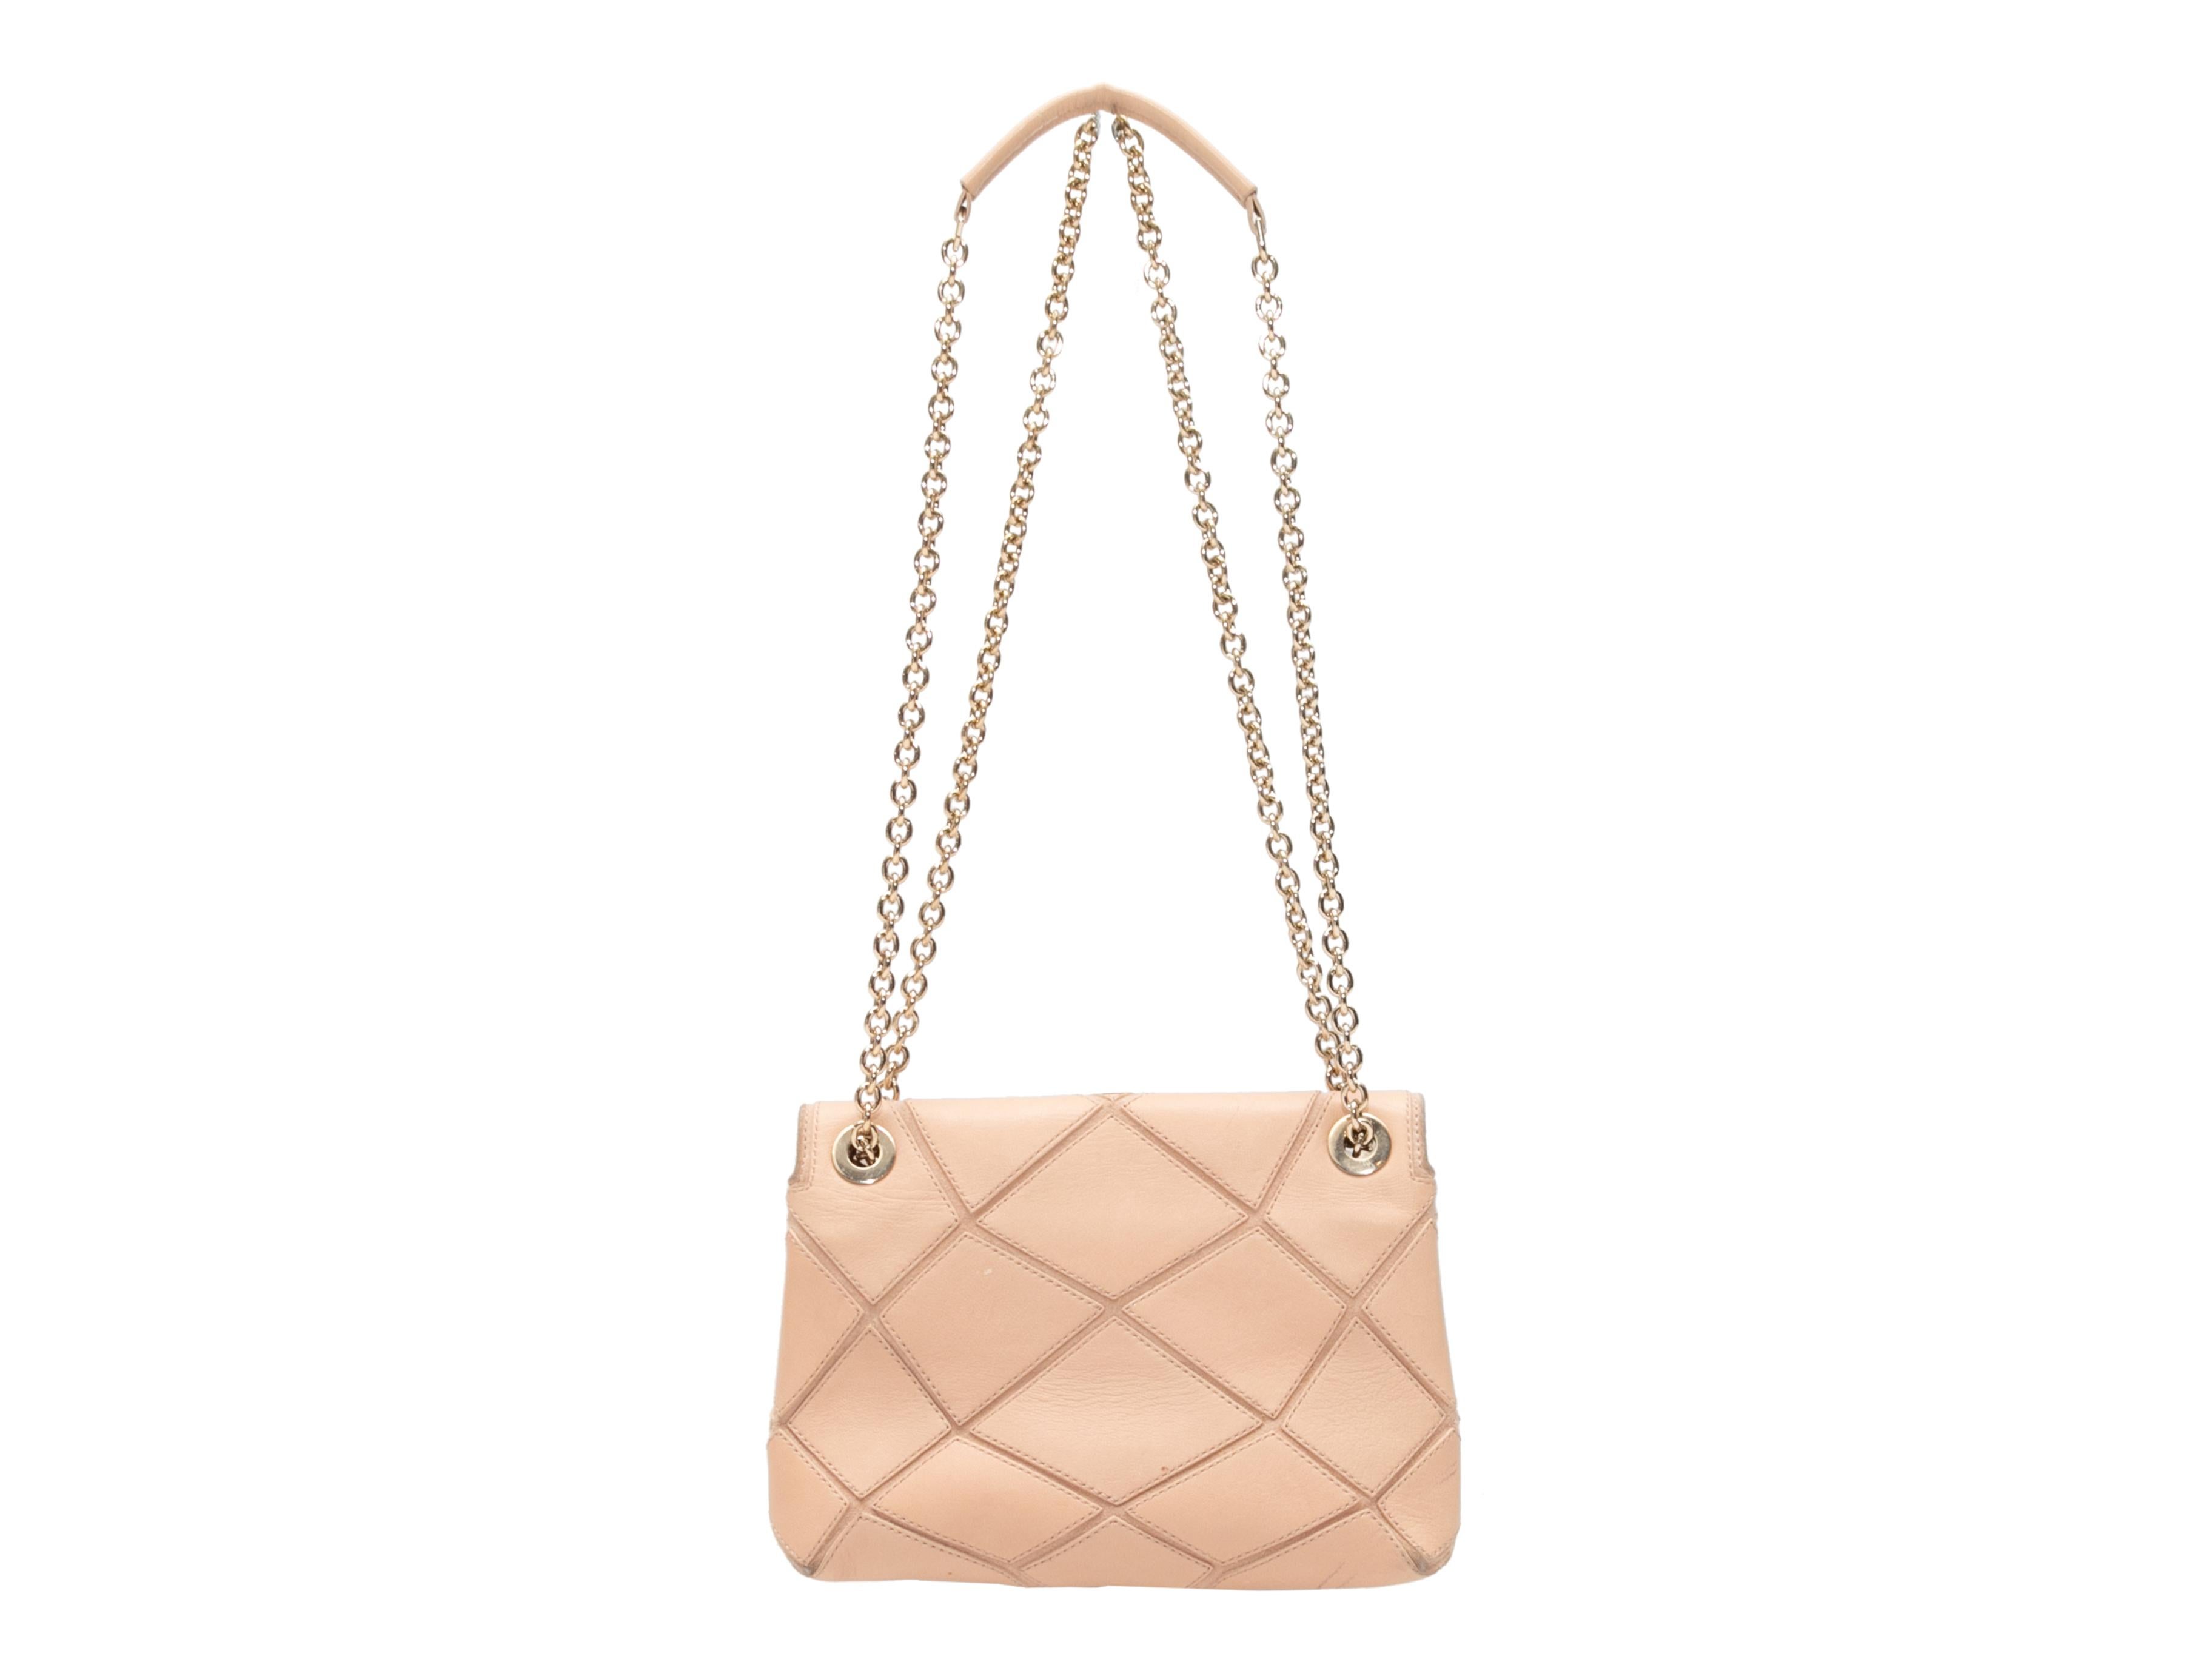 Beige Roger Vivier Geometric Patterned Crossbody Bag. This crossbody bag features a leather body, gold-tone hardware, dual chain-link and leather shoulder straps, and a front flap closure. 7.5